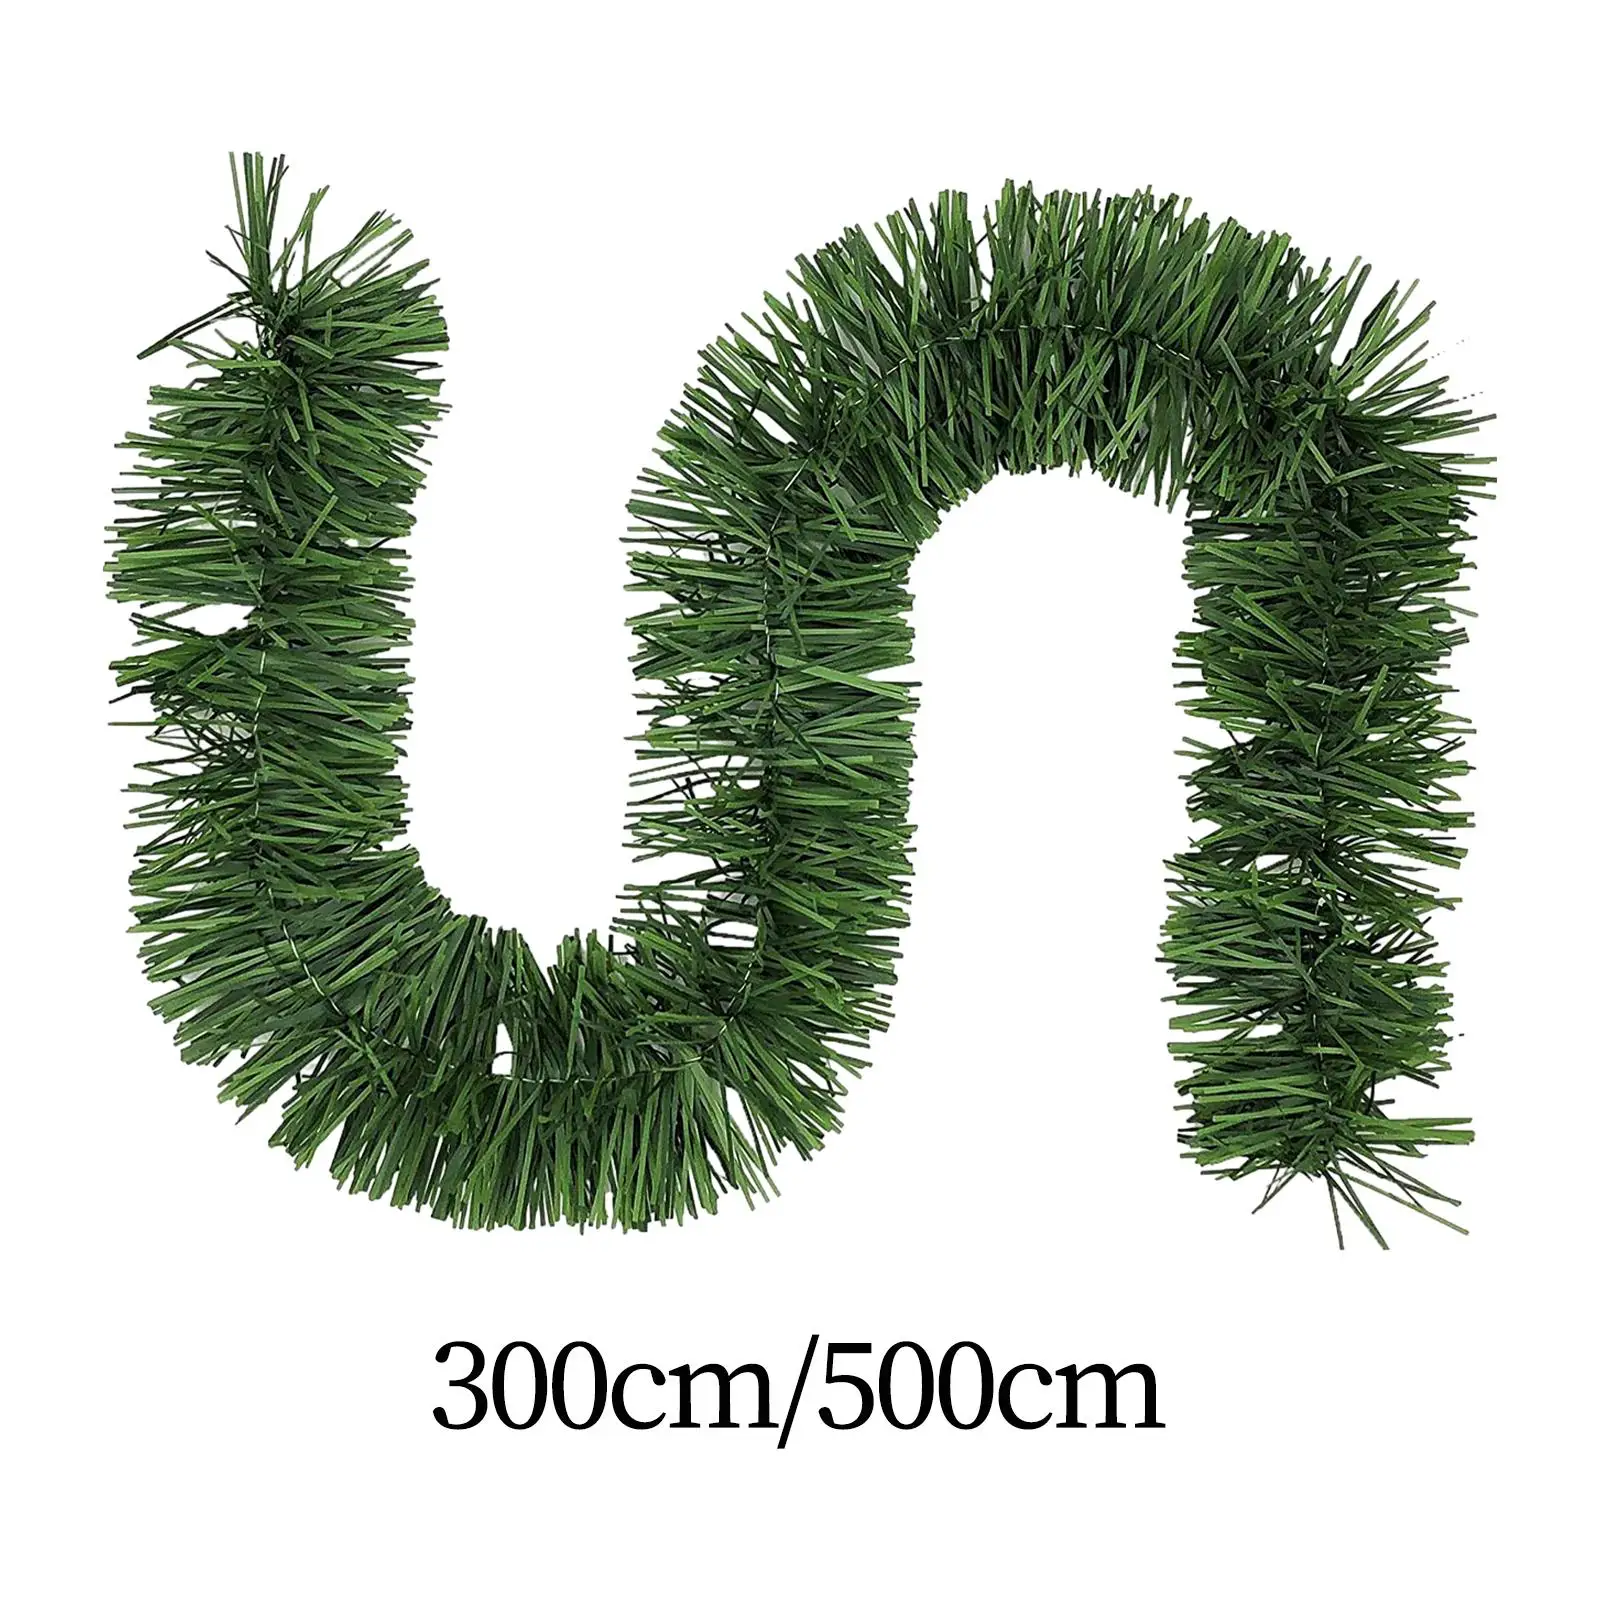 Artificial Christmas Garland, Holiday Green Garland Christmas Decorations, Artificial Xmas Garland for Mantel Outside Decor